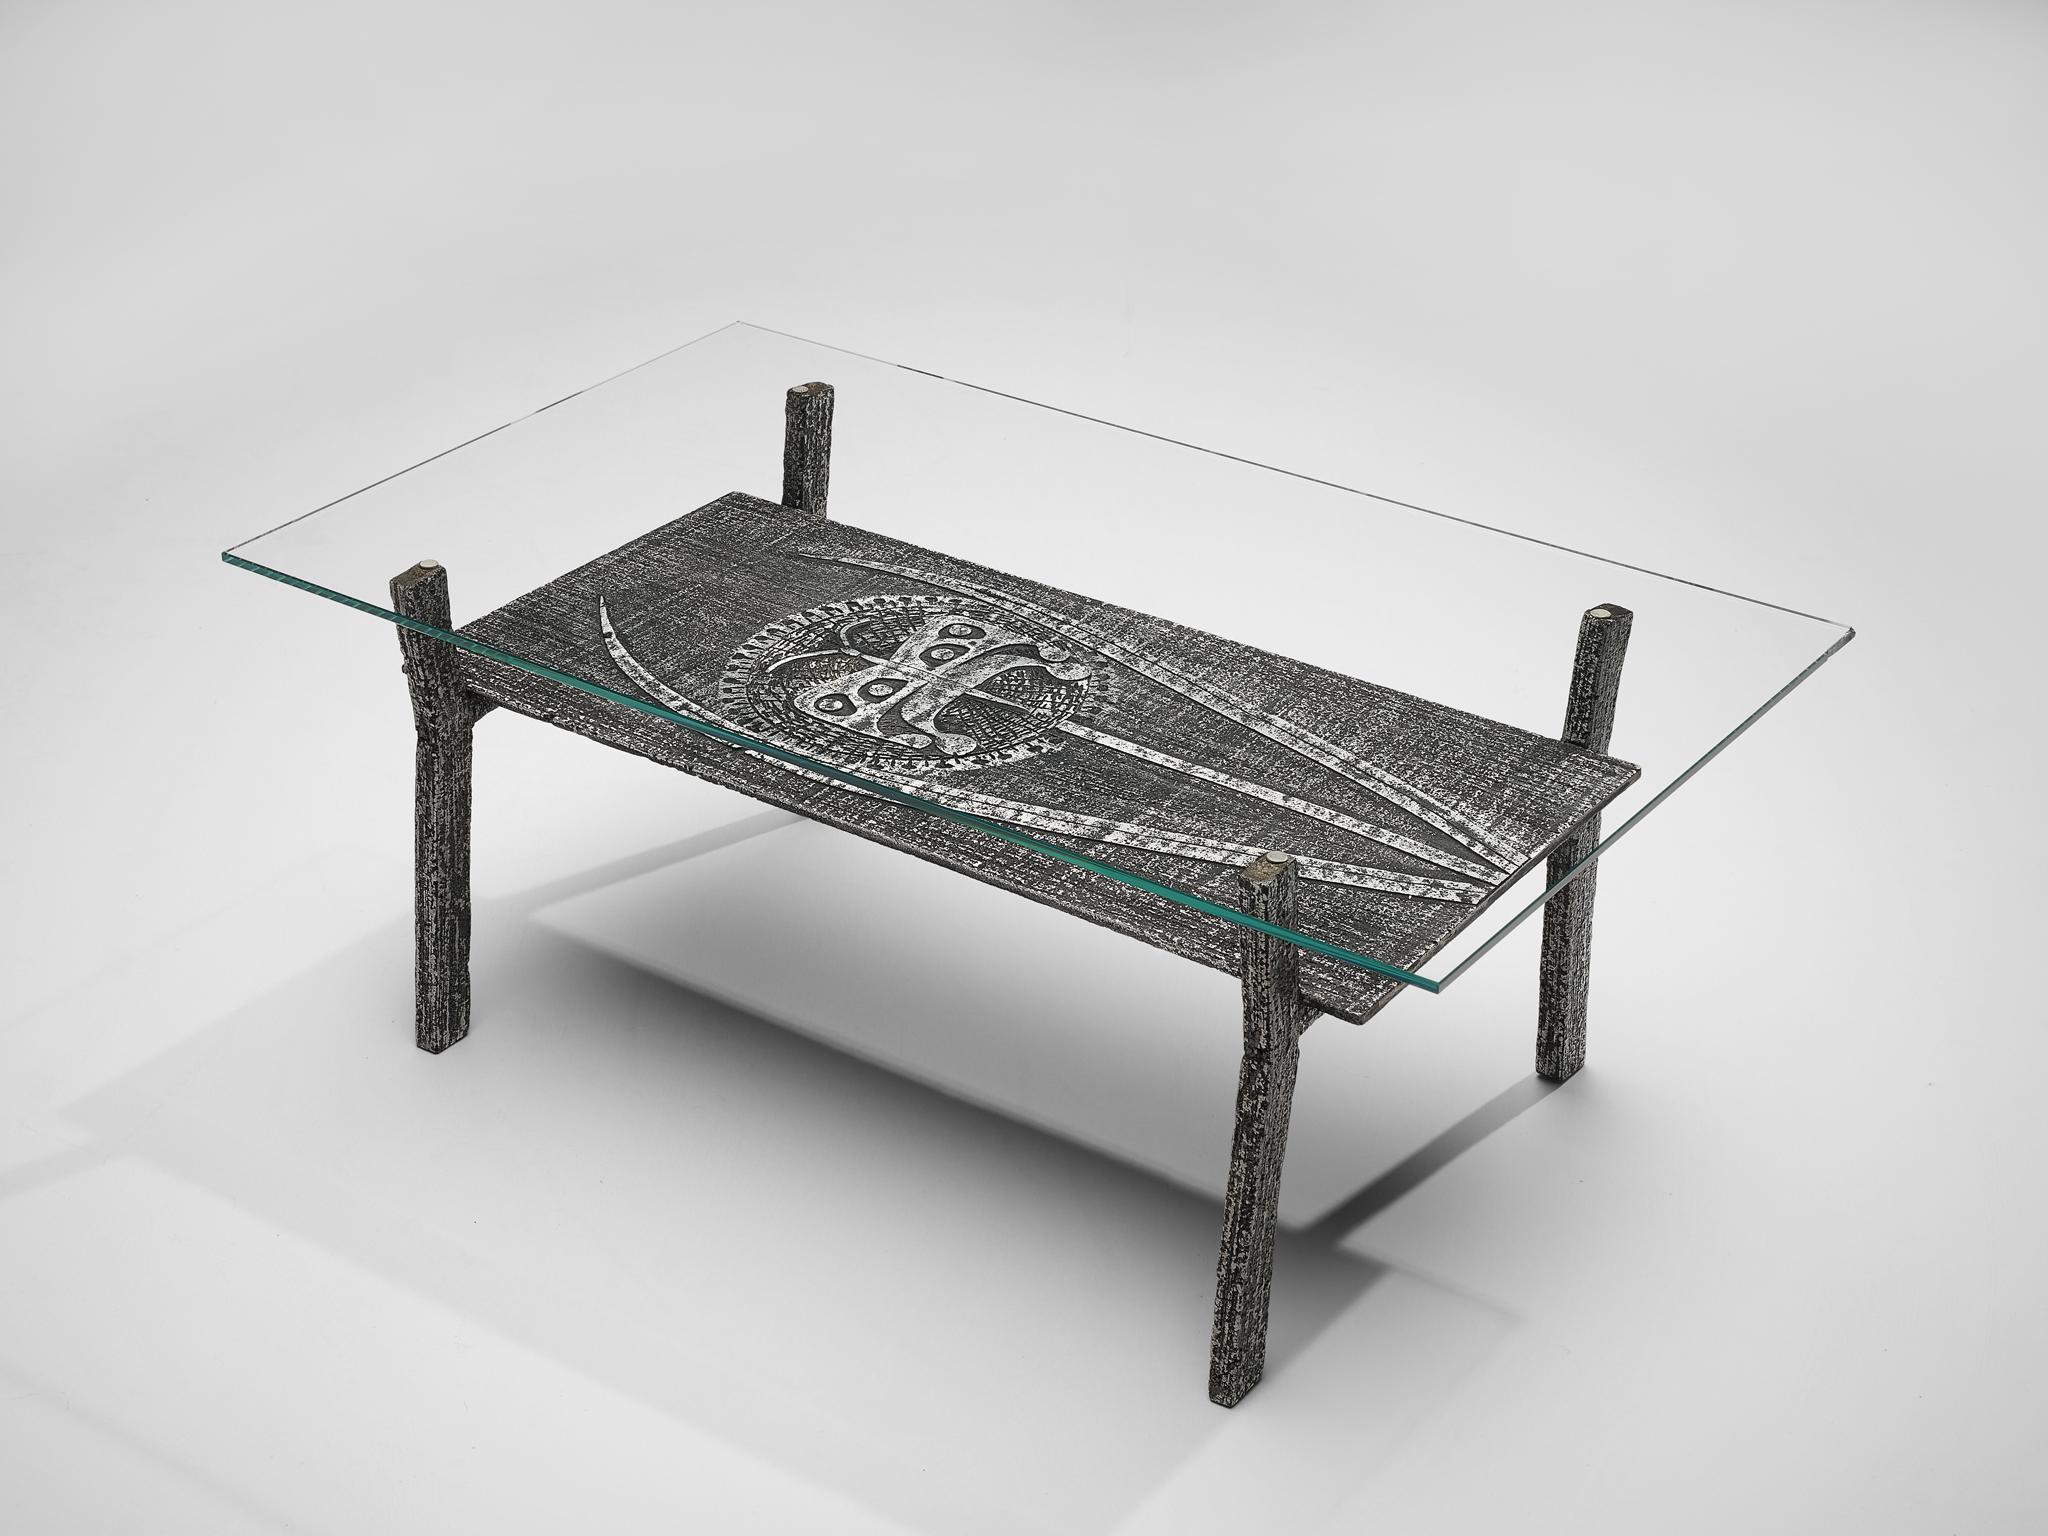 Coffee table, aluminum, glass, Belgium, 1980s

This Belgian brutalist coffee table with a butterfly motif is a striking piece that captivates with its unique fusion of industrial edge and artistic finesse. Crafted from strongly brushed aluminum, its